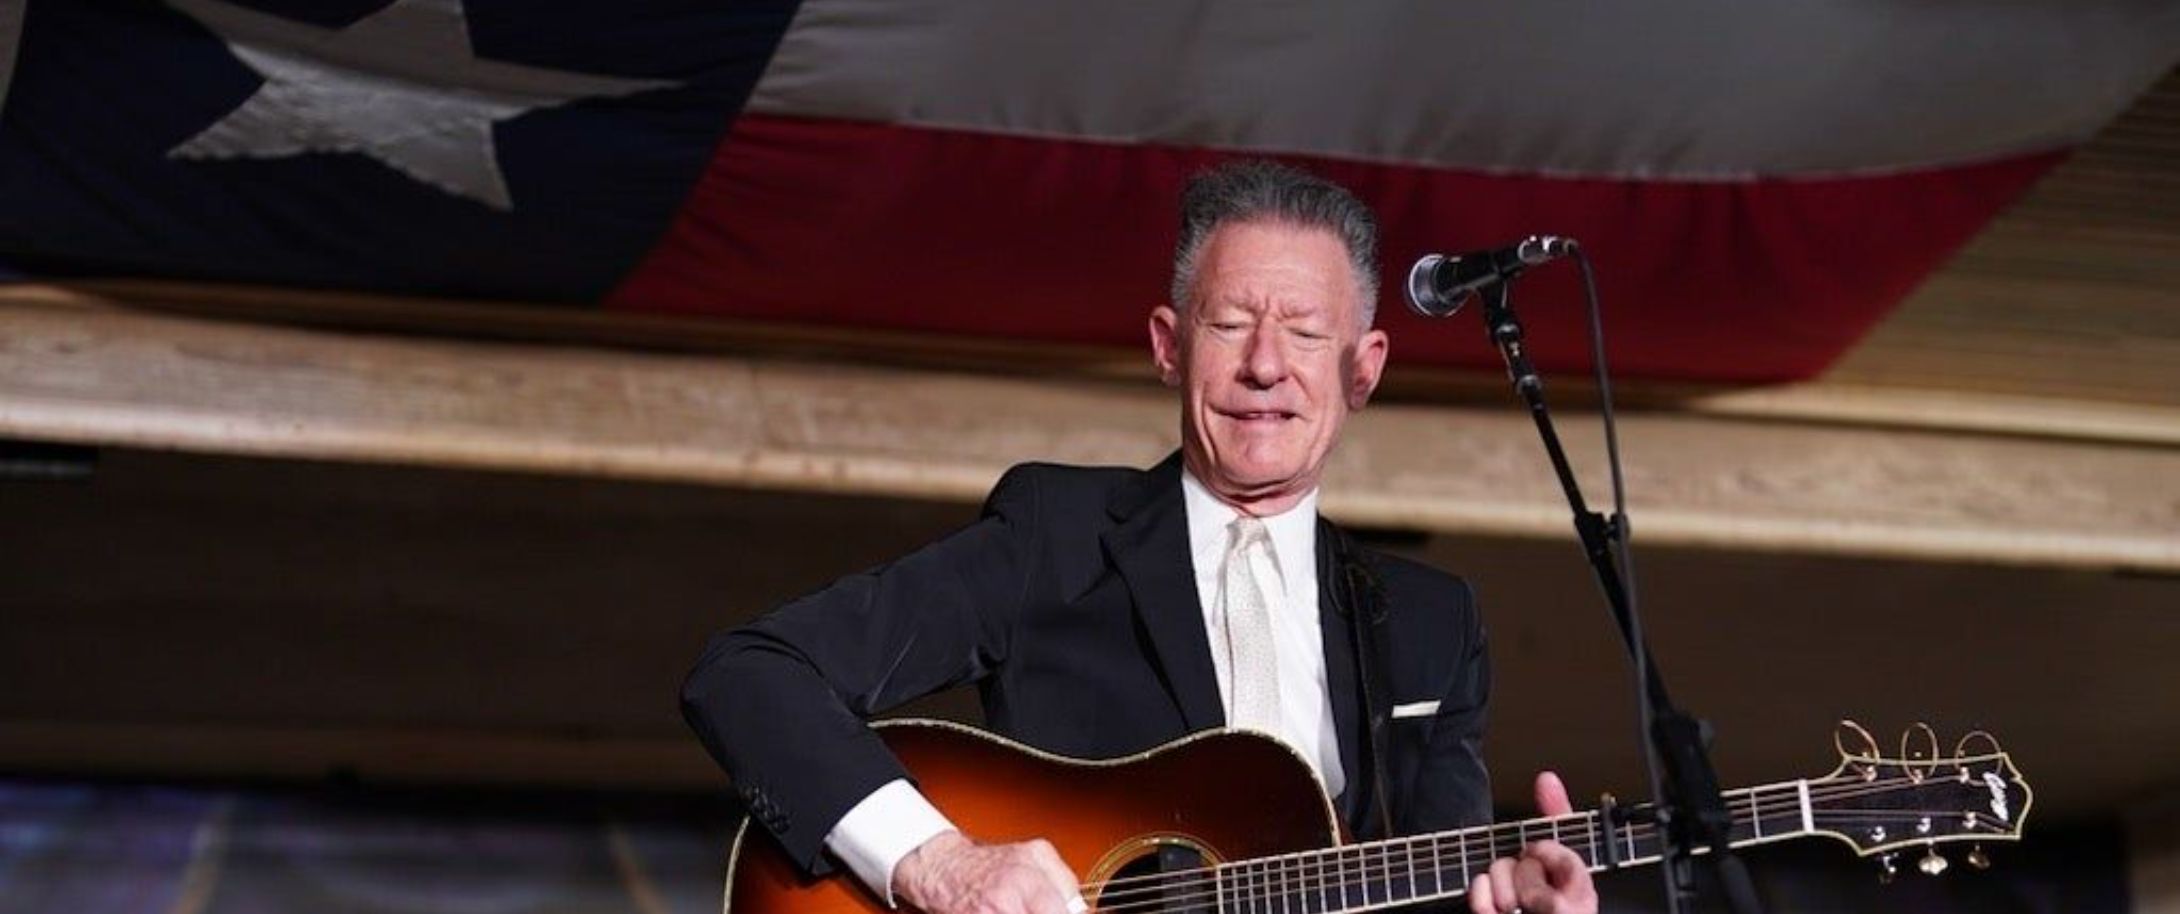 An Evening with Lyle Lovett and His Acoustic Group 